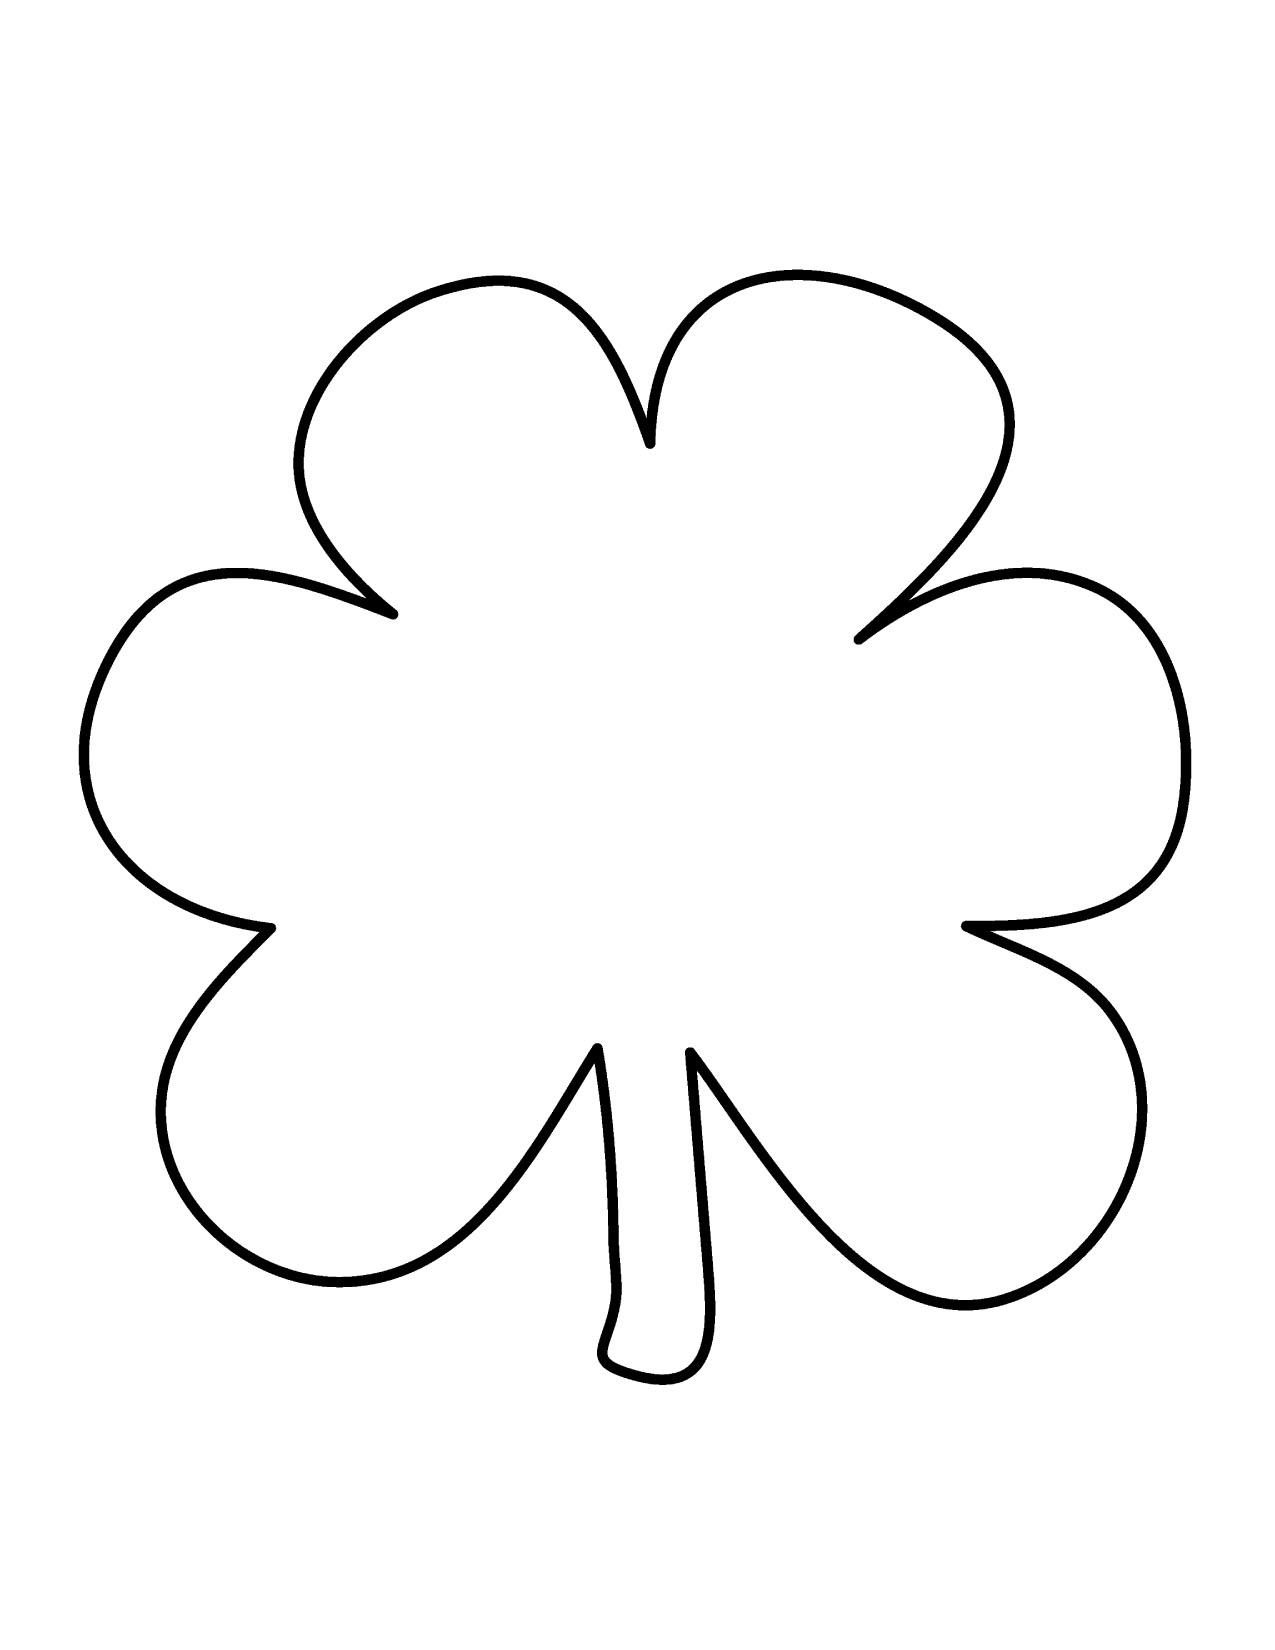 Shamrock clip art black and white free clipart 2 - Cliparting.com